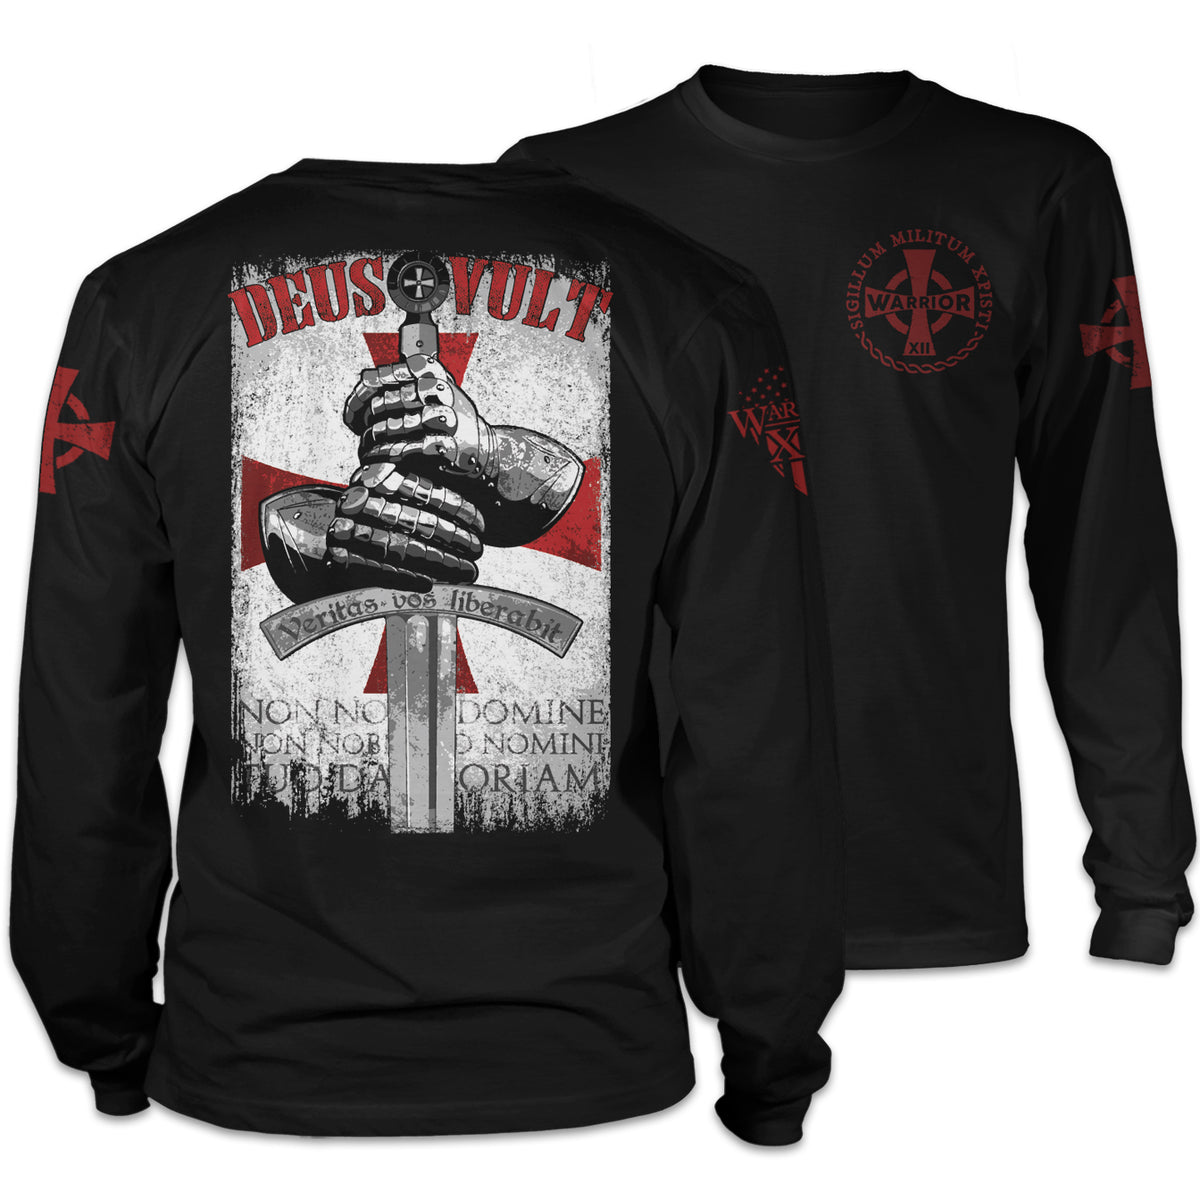 Front and back black long sleeved shirt with a design that is an iconic representation of the crusaders that invokes the spirit of the warriors of Christ. The design of the hands around the sword is printed on the back.